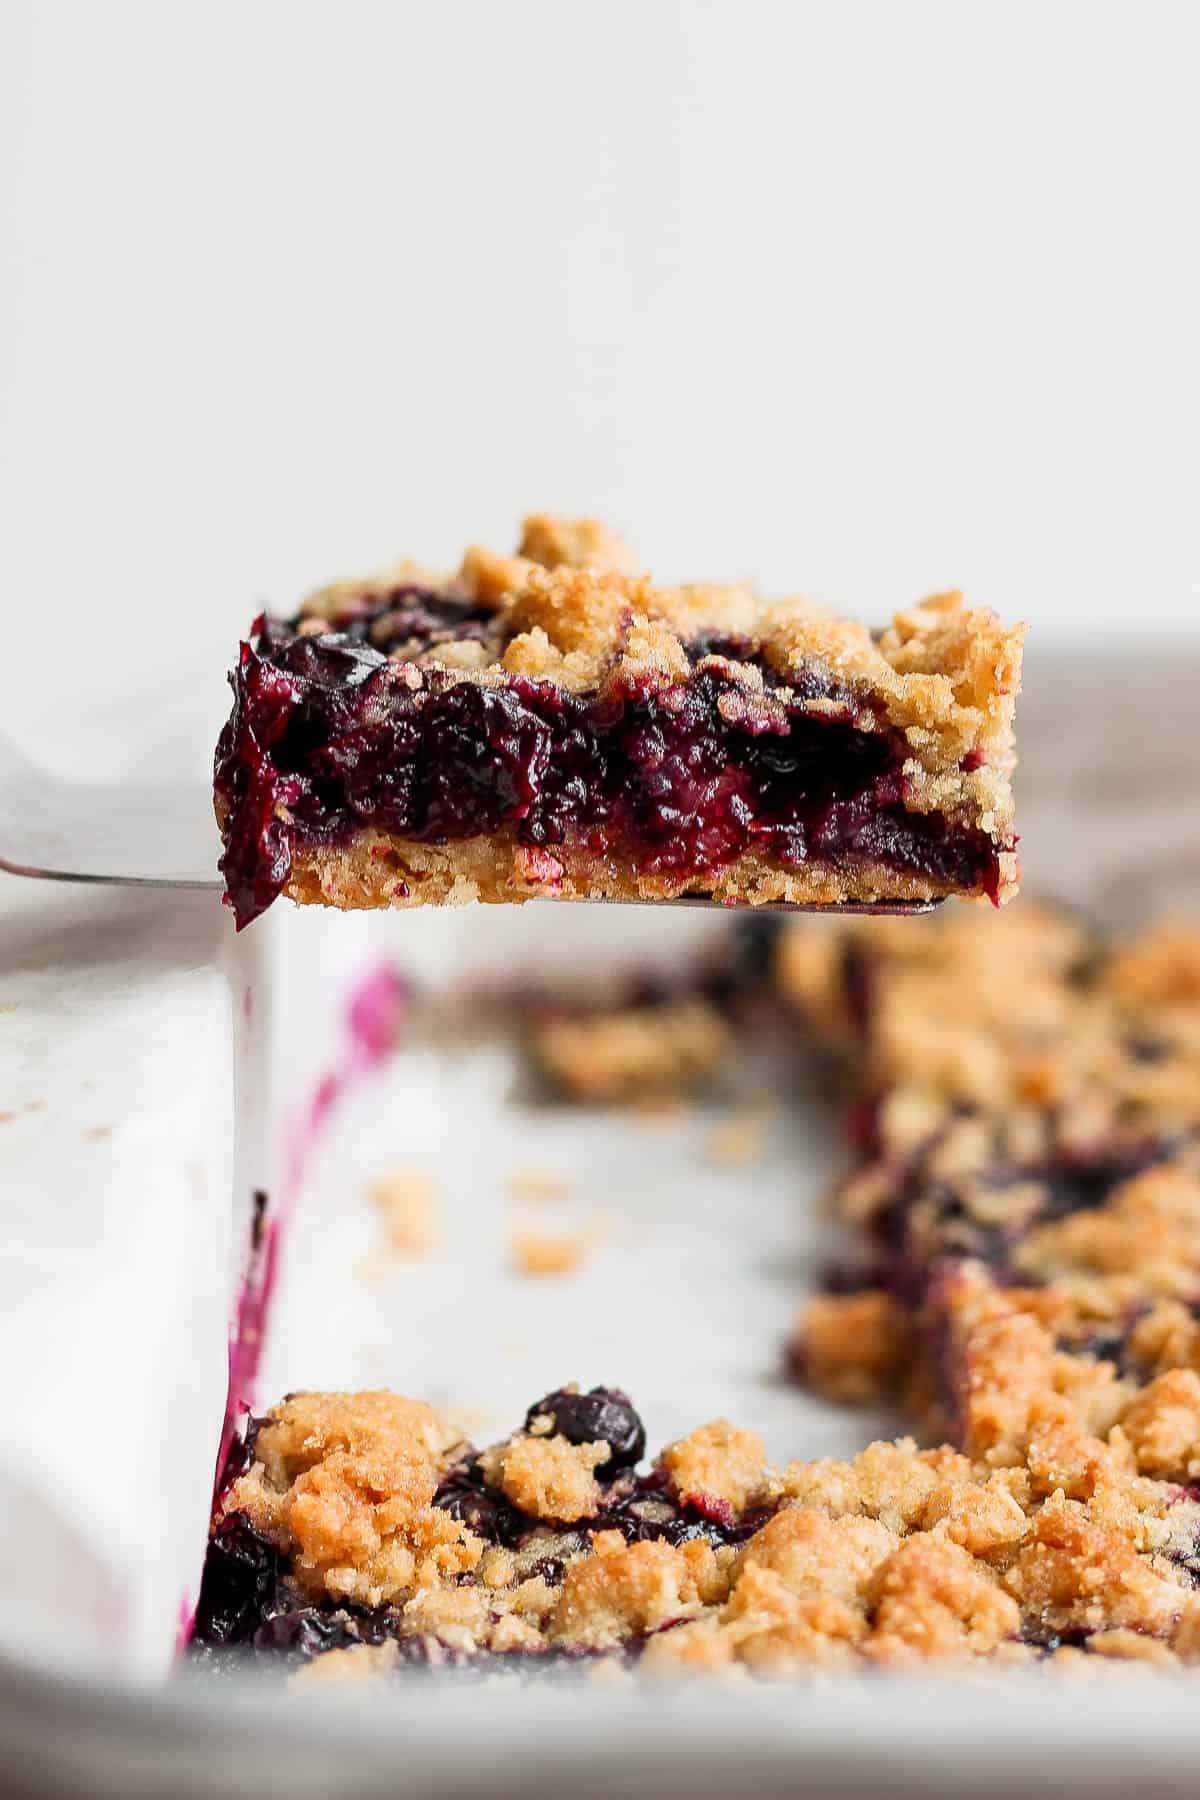 A blueberry crumb bar being lifted out of the pan.